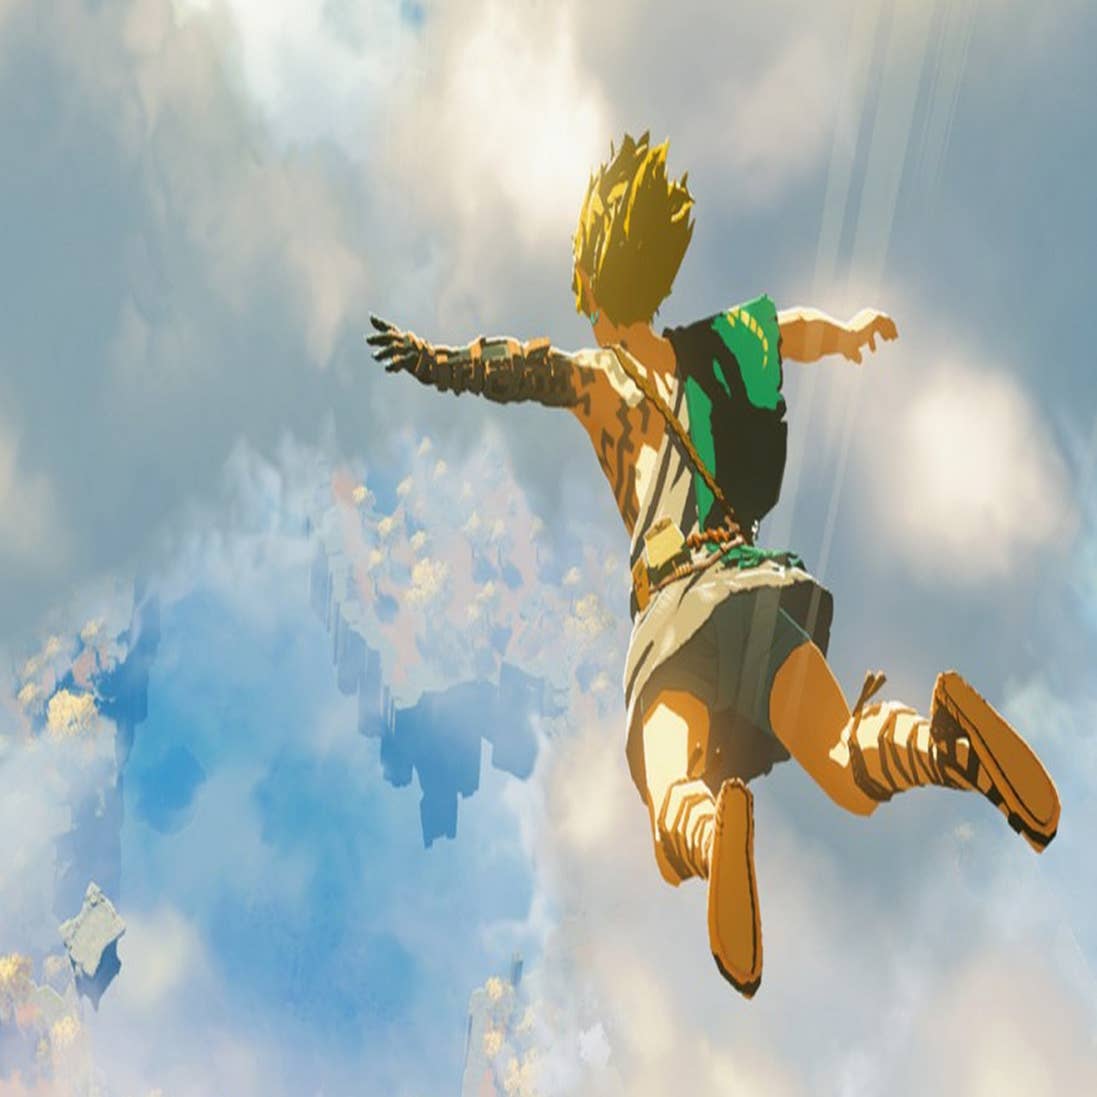 The Legend of Zelda: Breath of the Wild Sequel Delayed To Spring